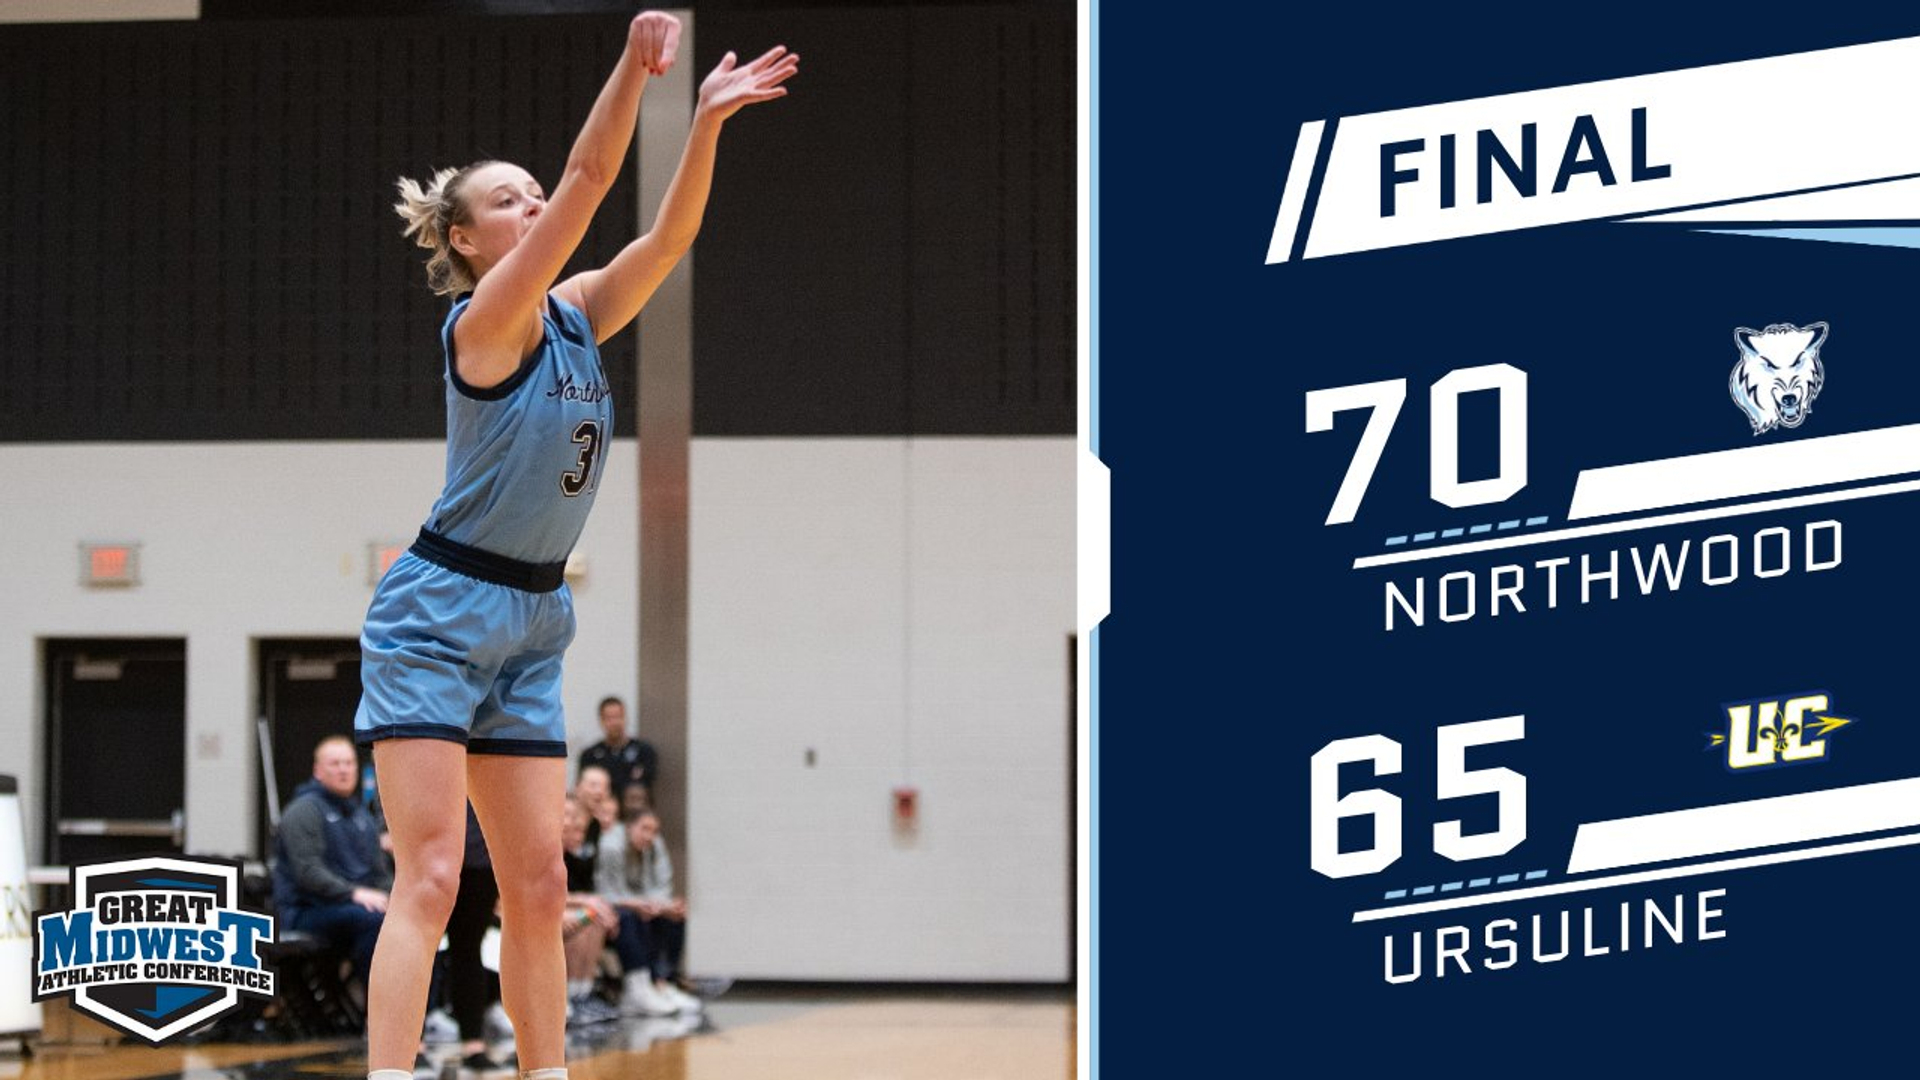 Women's Basketball Posts Fifth Straight Win, Defeating Ursuline 70-65